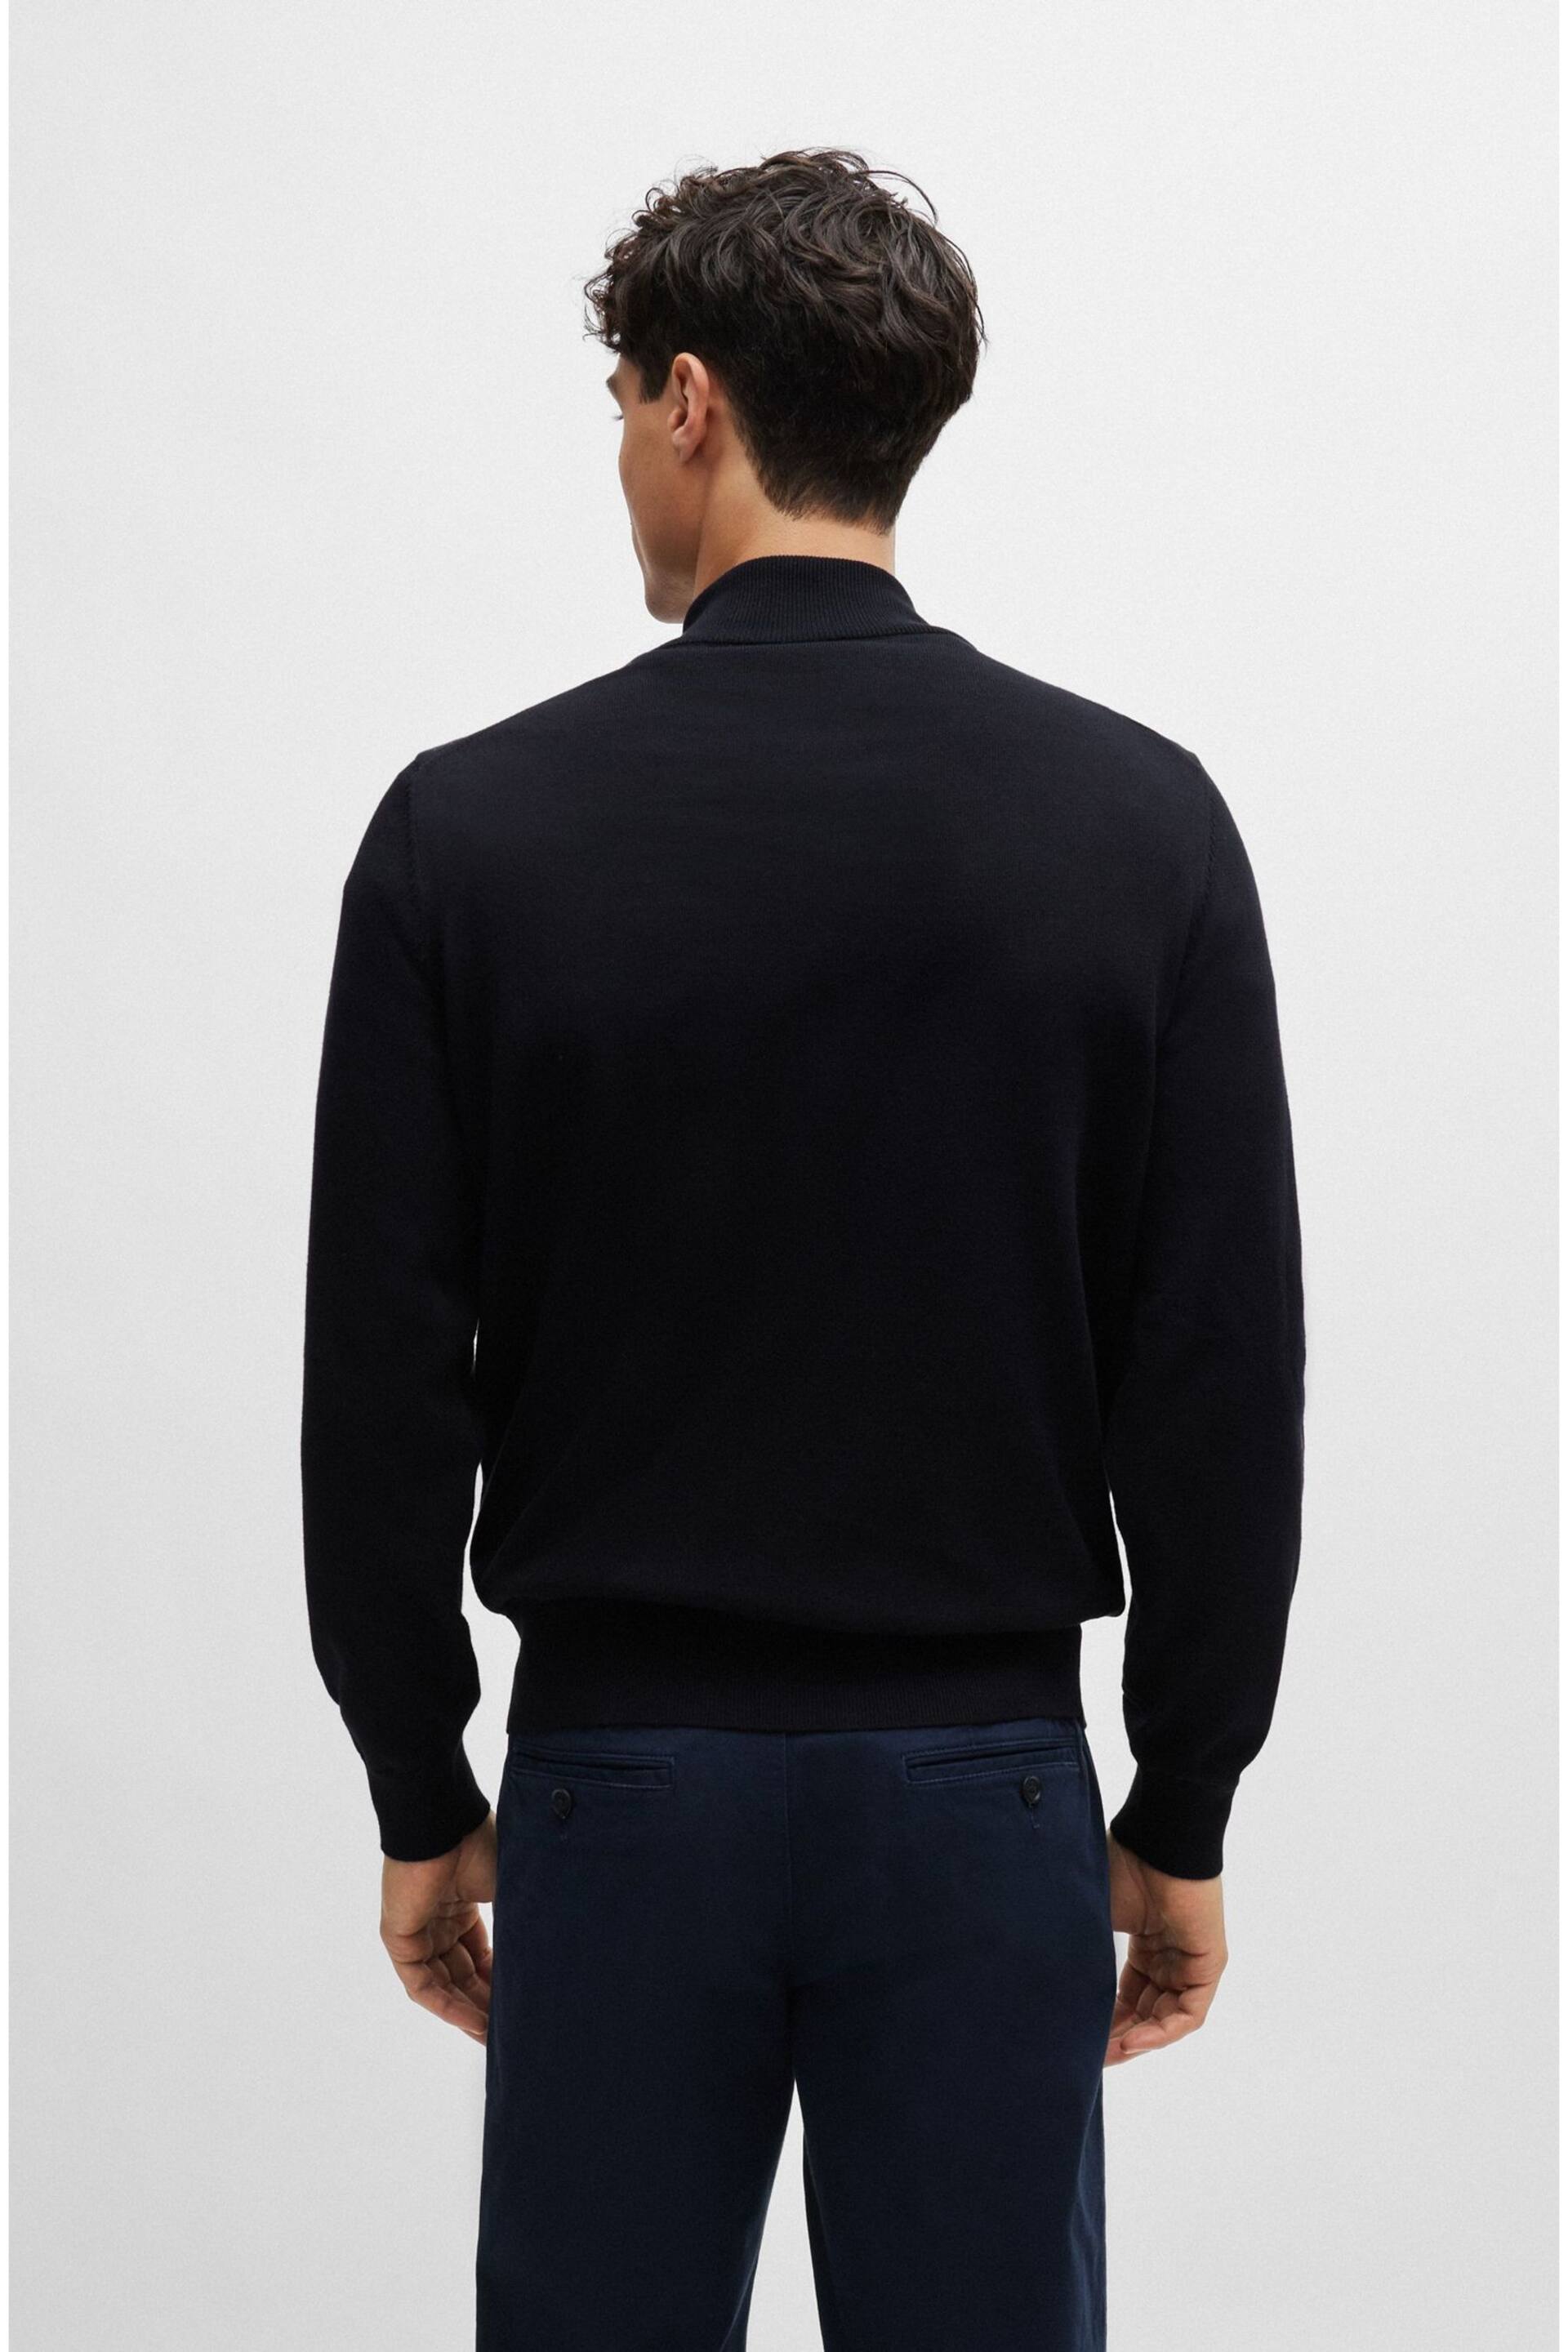 BOSS Dark Blue Cotton-Jersey Zip-Neck Sweater With Embroidered Logo - Image 2 of 5